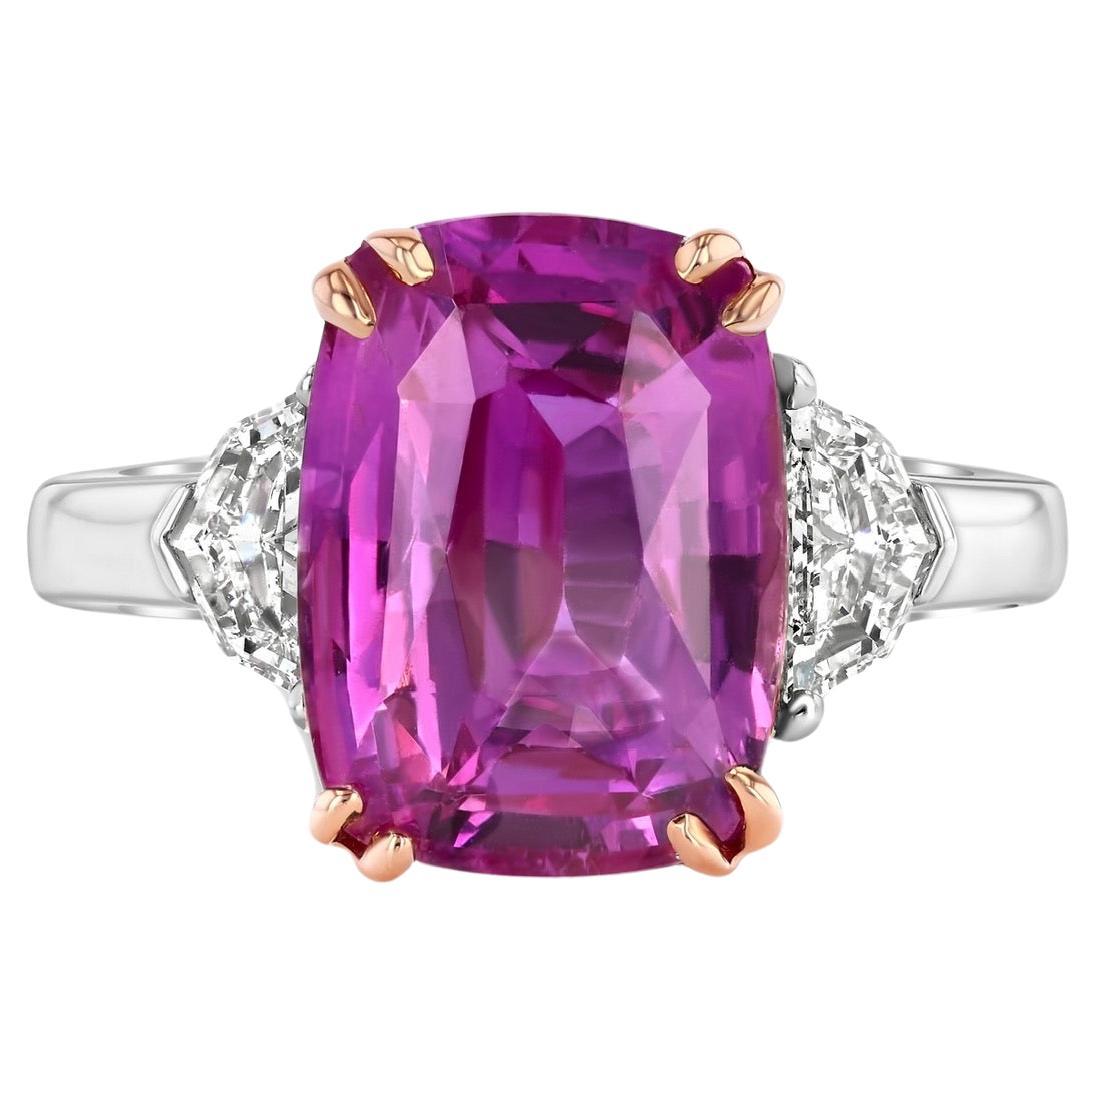 7.13-carat cushion Pink Sapphire ring. GIA certified. For Sale